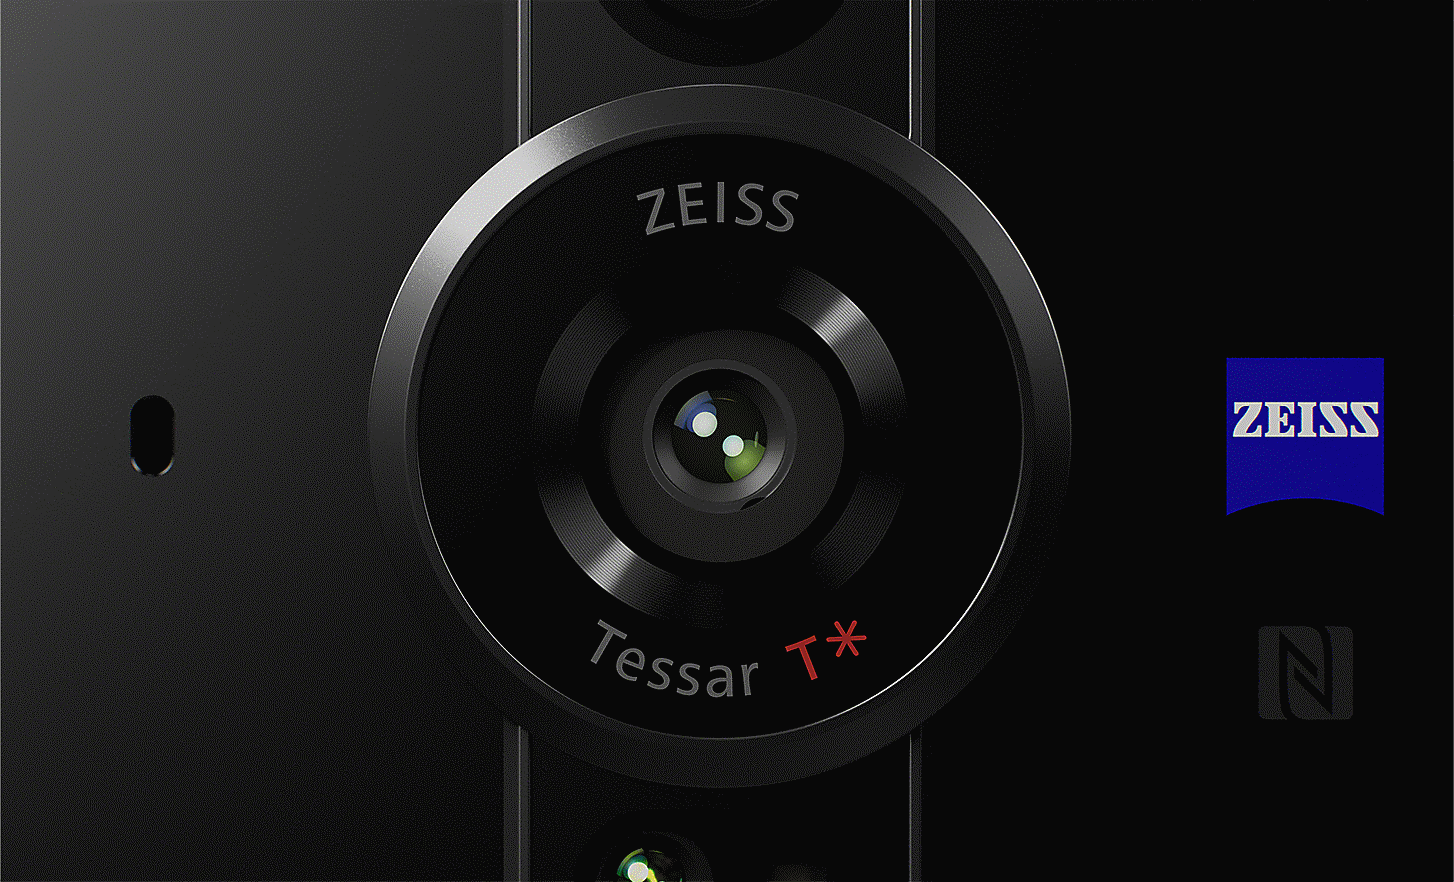 Close-up on ZEISS Tessar T* lens with ZEISS logo